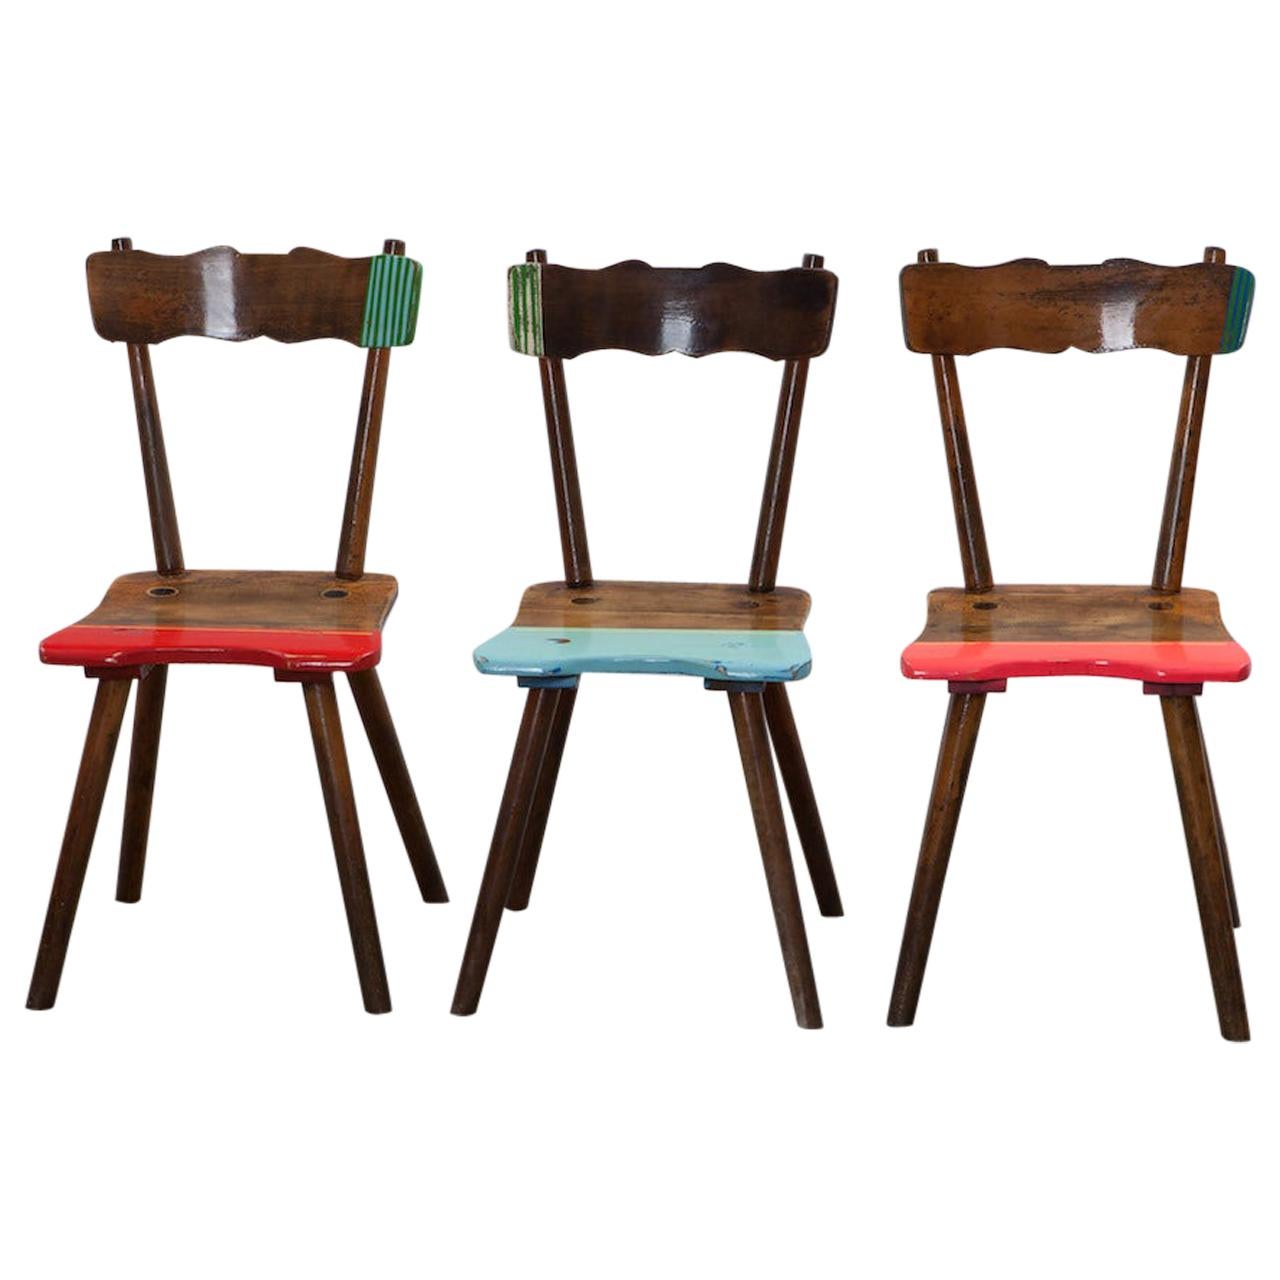 Functional art, 3 chairs "Bavarian Steel" by Markus Friedrich Staab For Sale